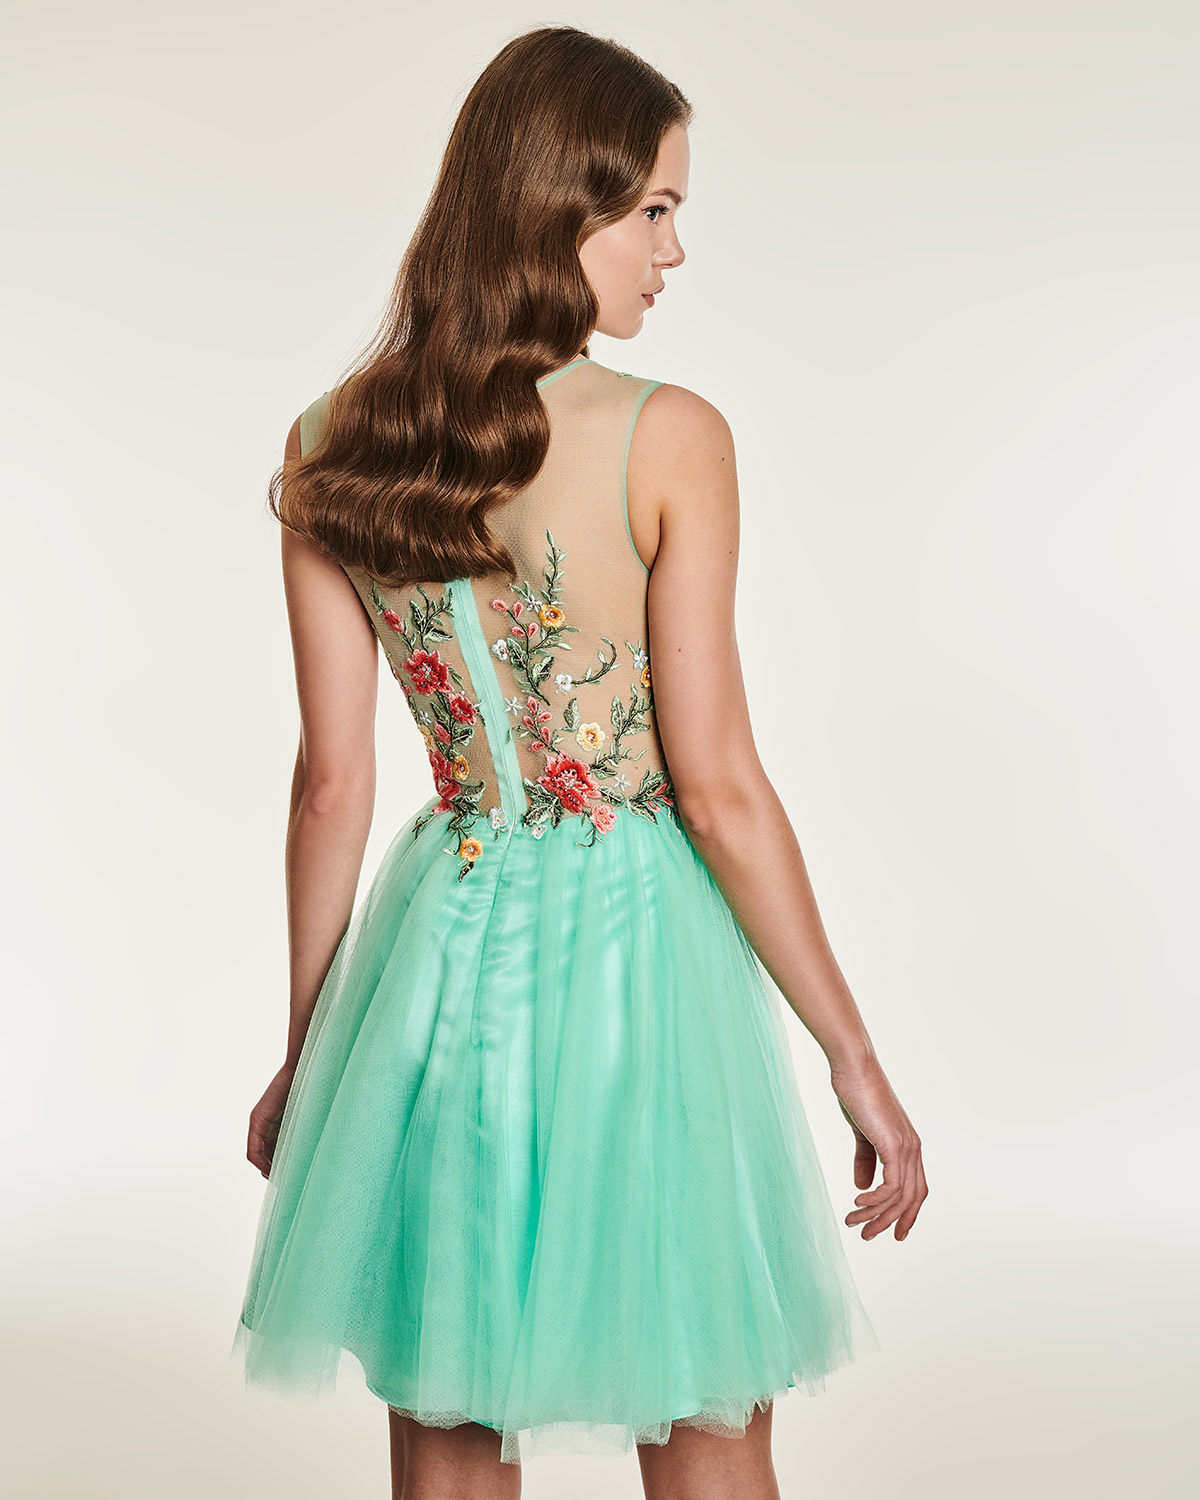 Short cocktail tulle dress with applique flowers